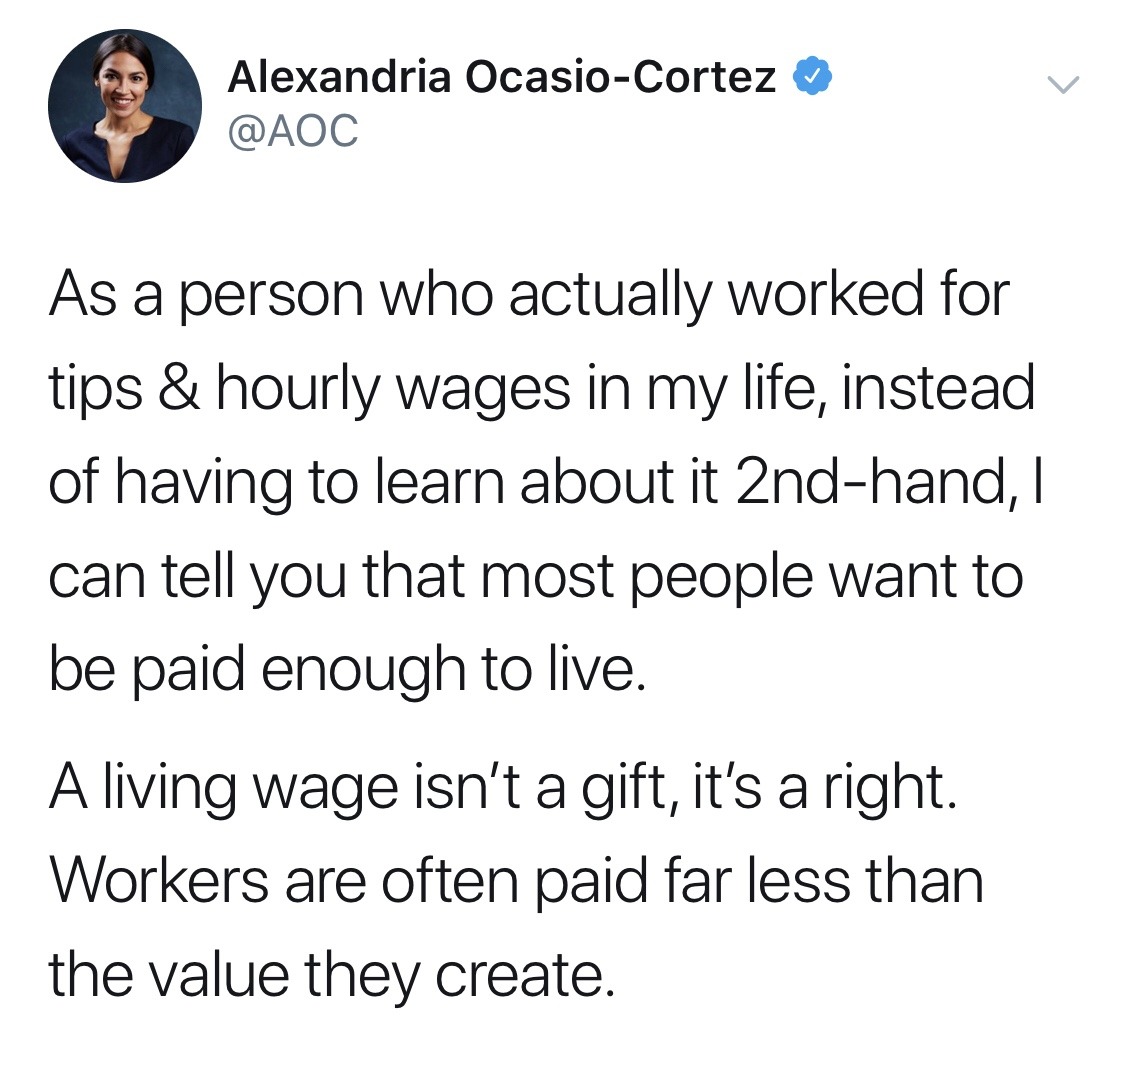 odinsblog: Ivanka Trump, a trust fund baby who has never done an honest day’s work, is trying to lecture Alexandria Ocasio-Cortez? About income inequality and living wages??? Seriously?  Ivanka is pushing the old Republican canard that “poor people